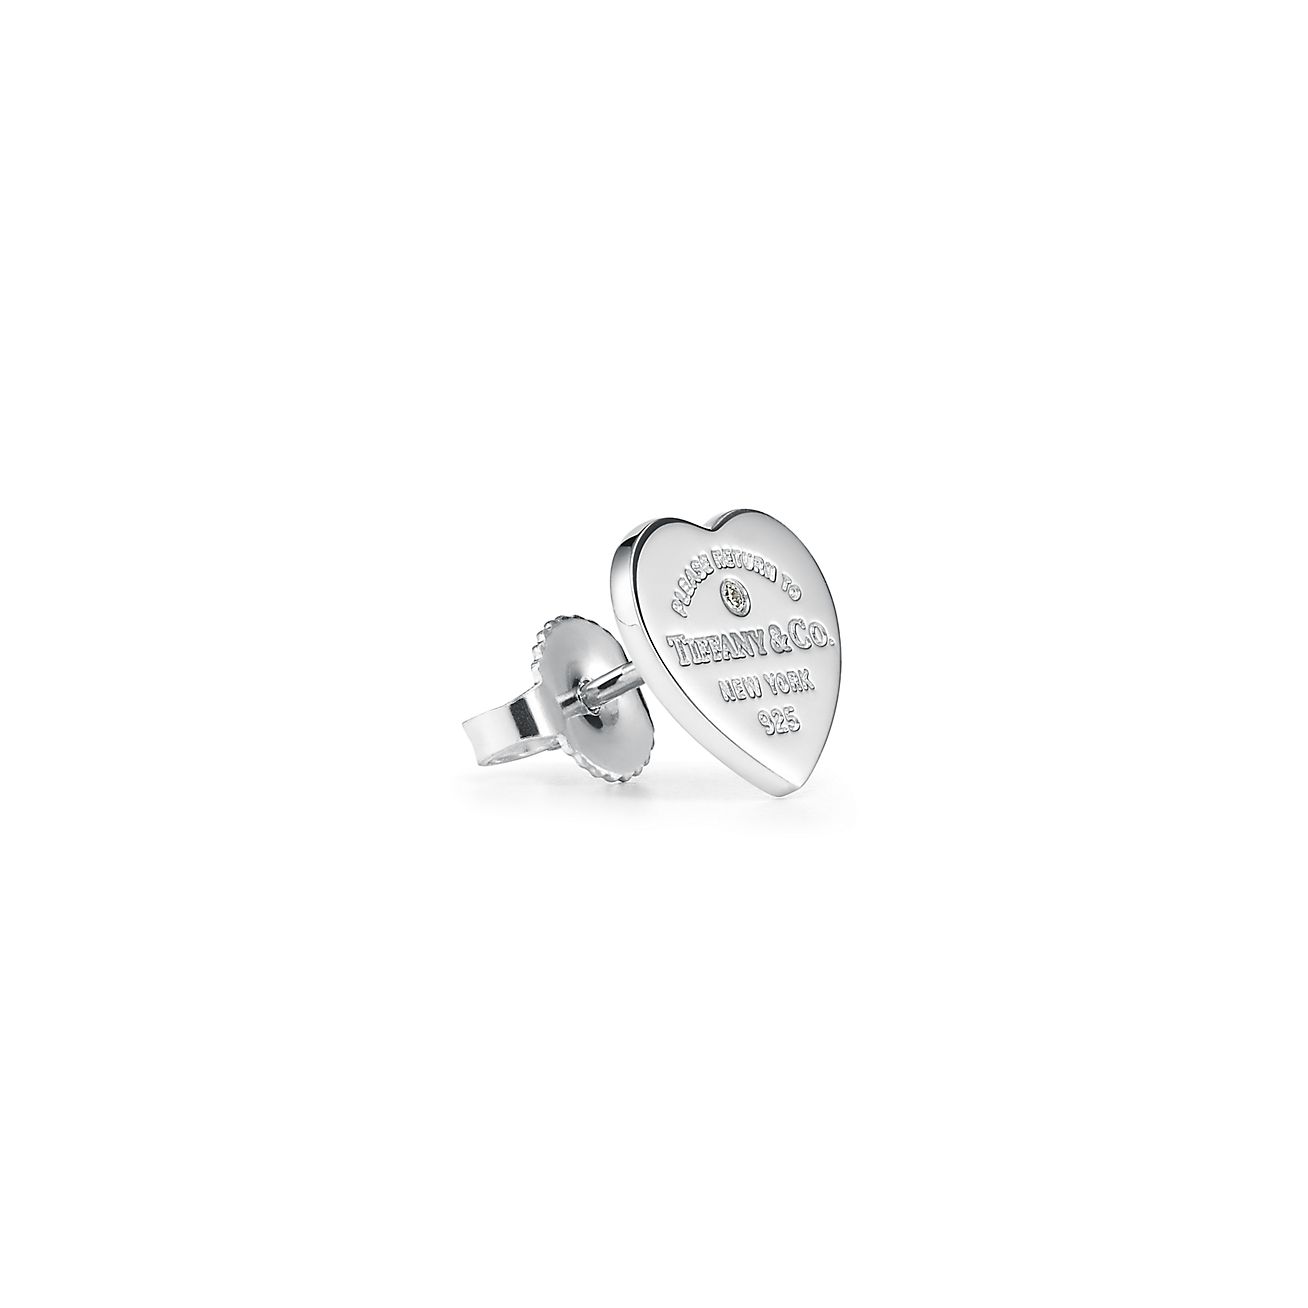 T & C Heart Earrings Studs Stainless Steel Push Backings With Gift Box: Buy  Online at Best Price in UAE - Amazon.ae